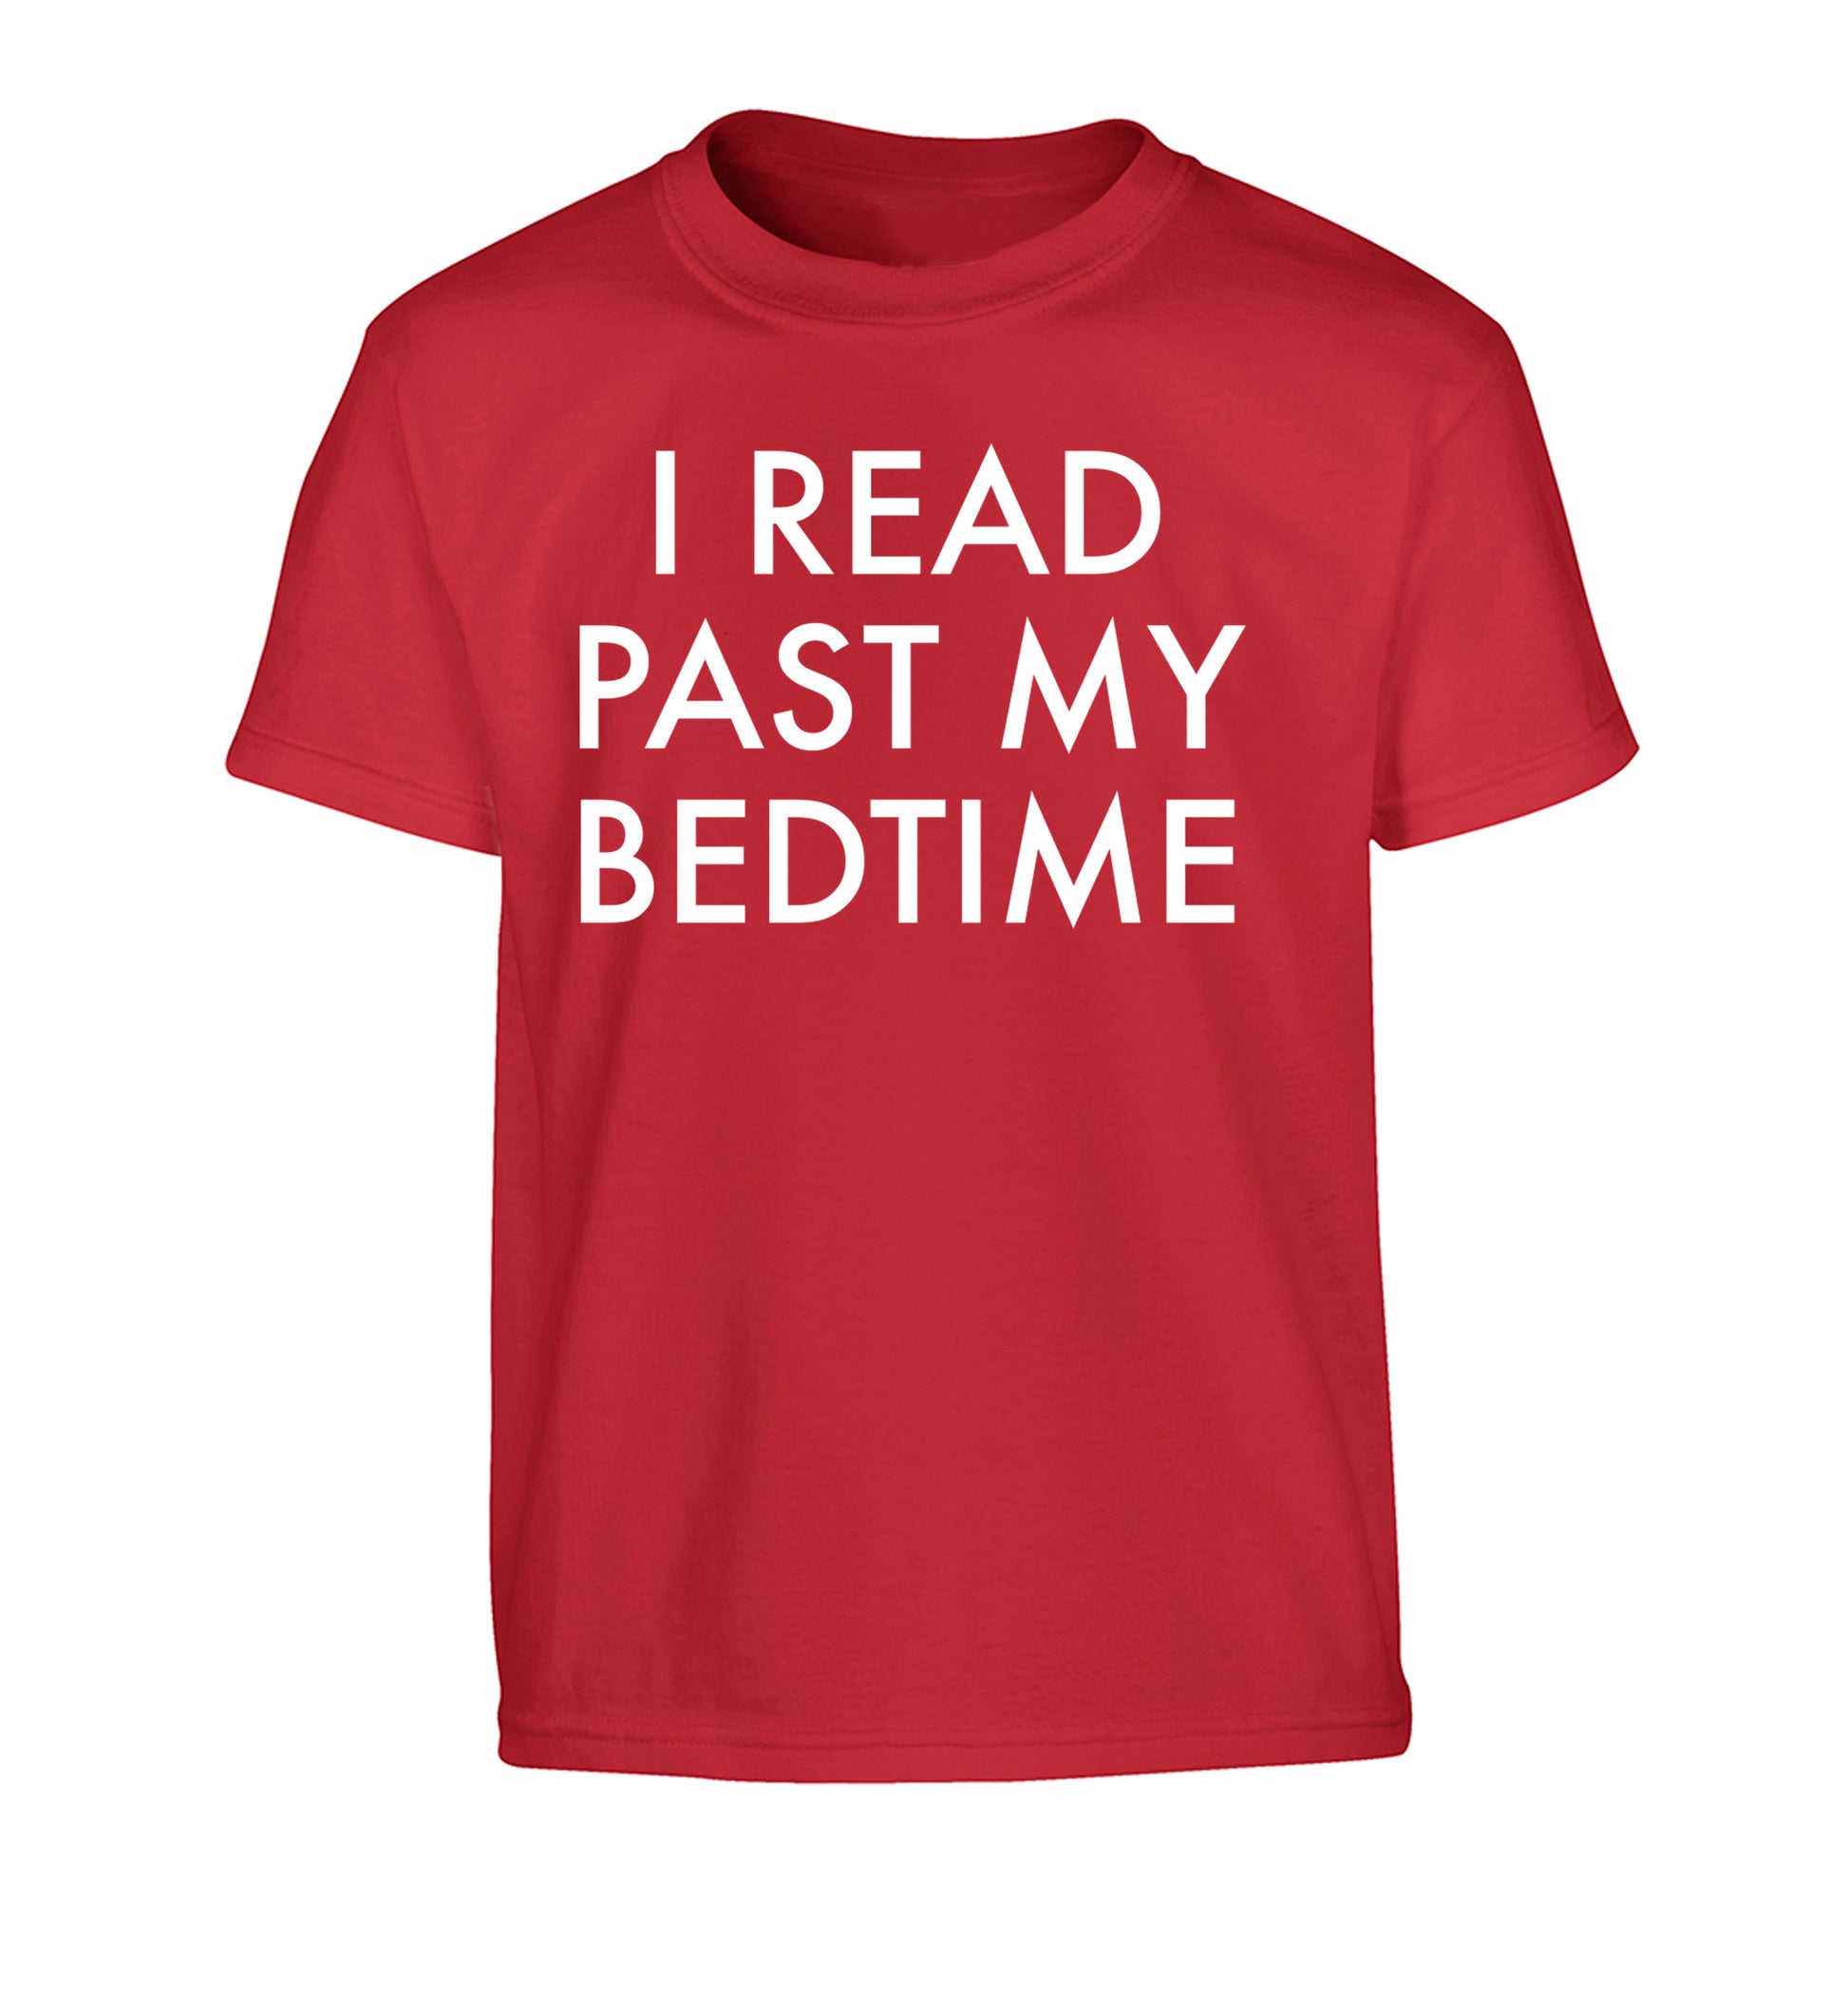 I read past my bedtime Children's red Tshirt 12-14 Years